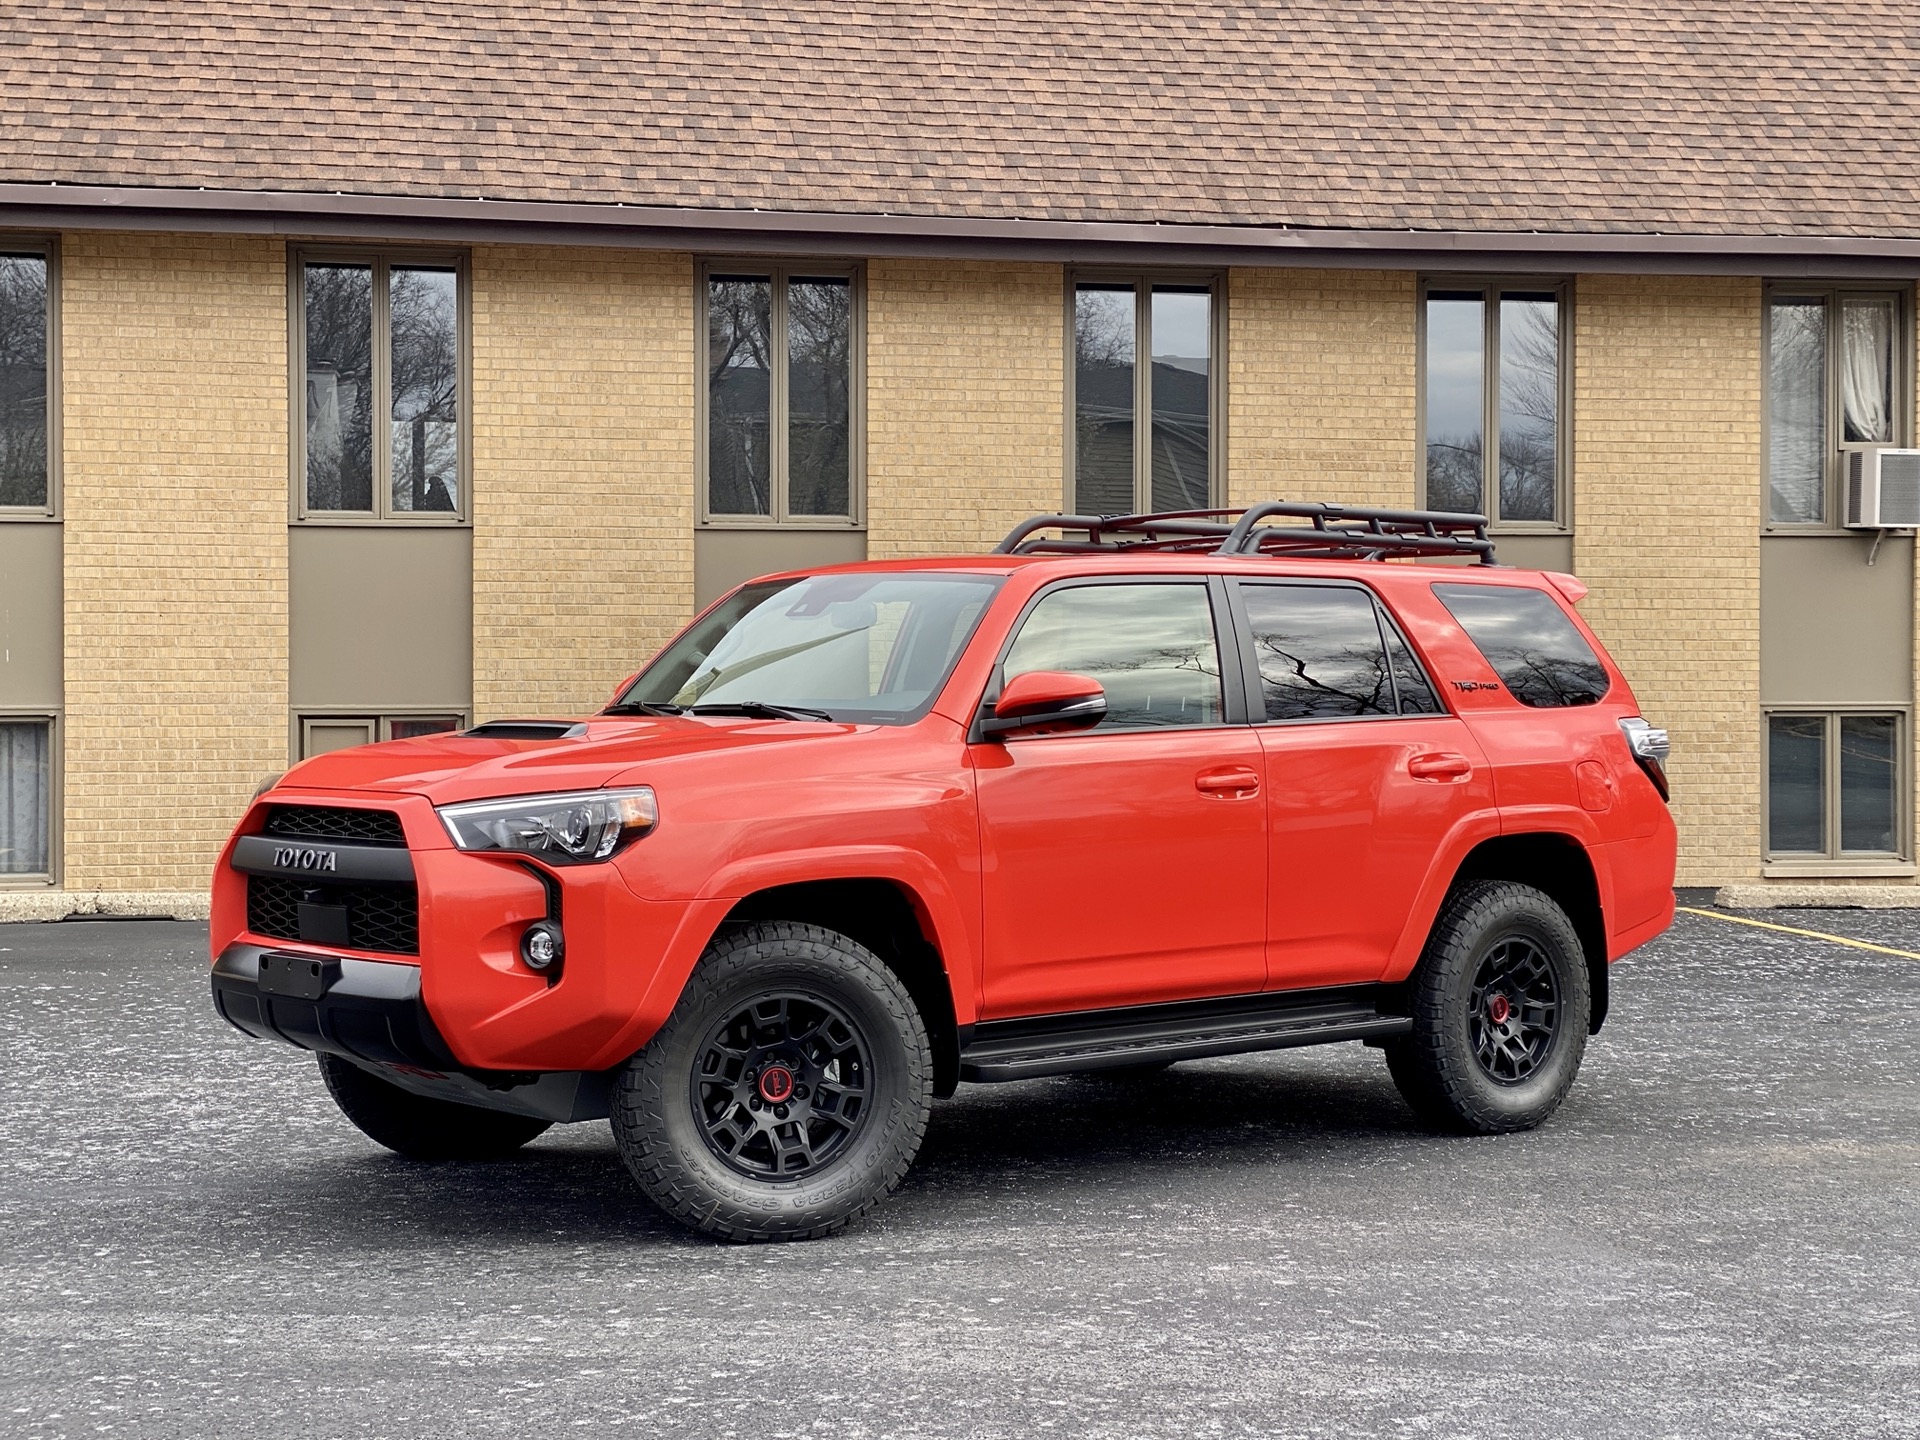 Test drive: 2022 Toyota 4Runner TRD Pro channels old-school charms